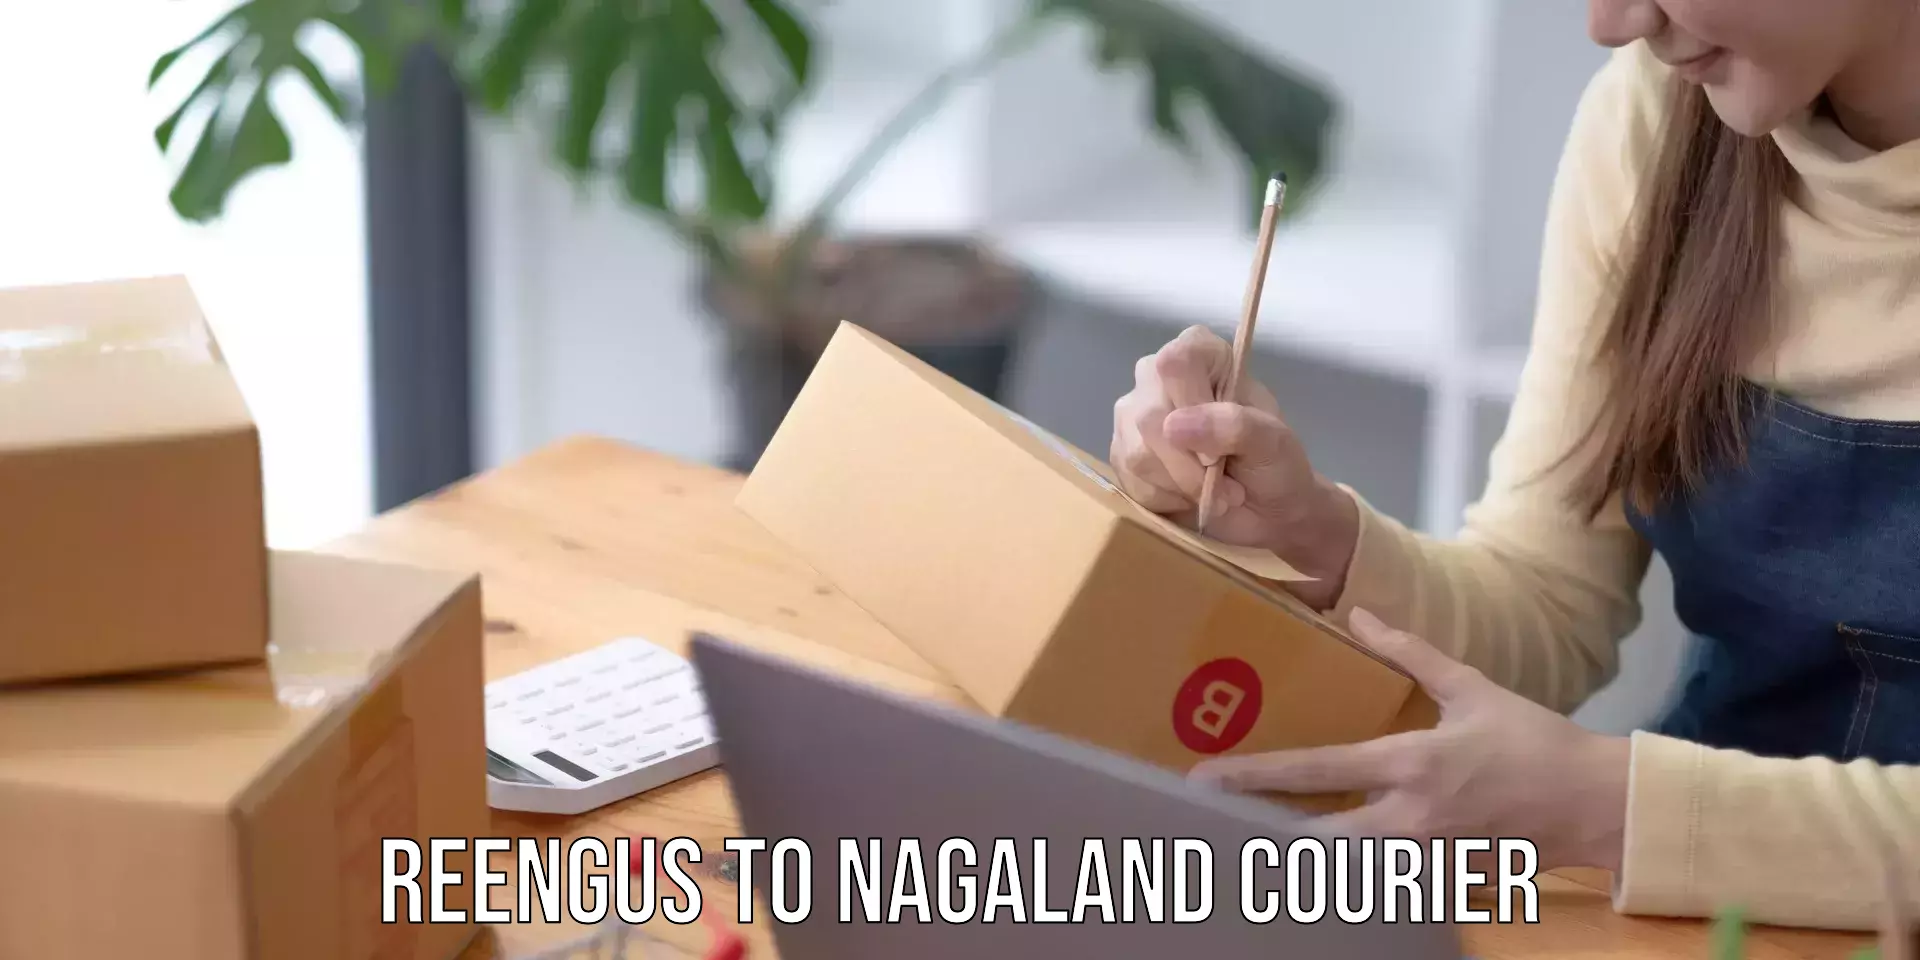 Overnight delivery services Reengus to Nagaland